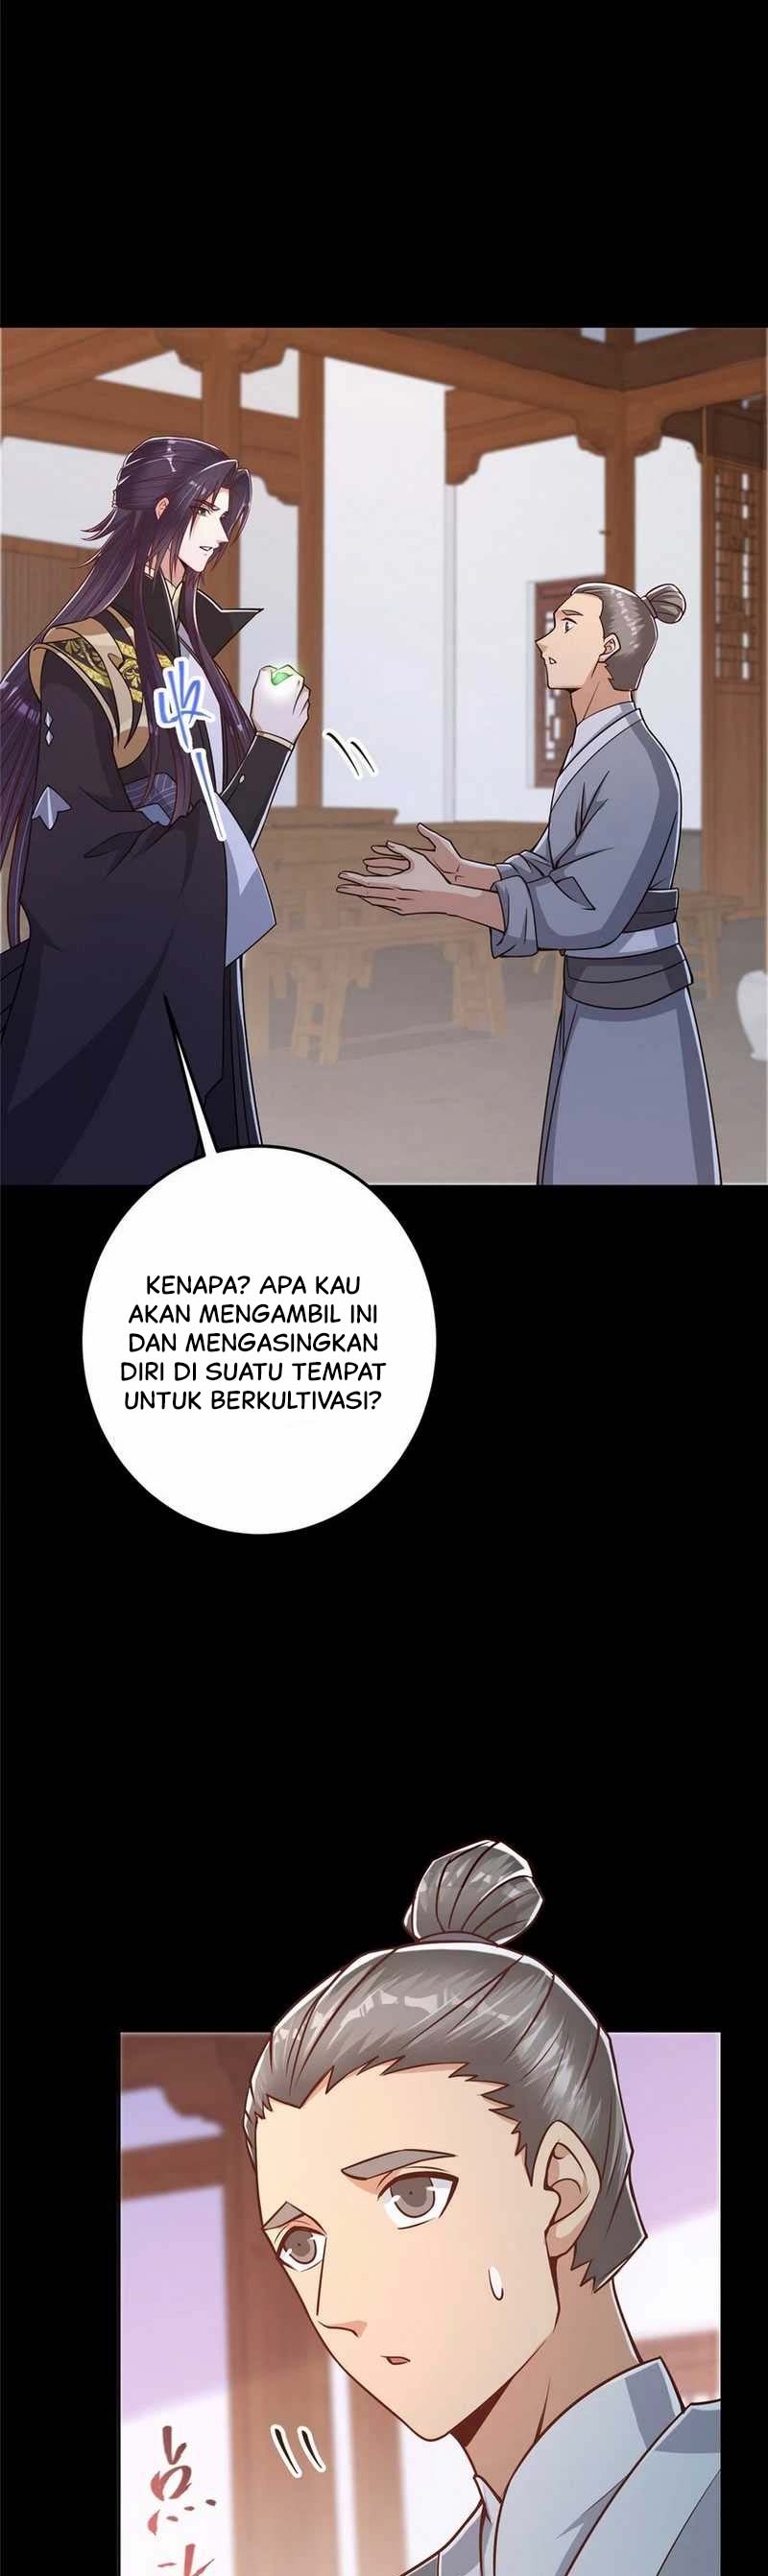 Keep A Low Profile, Sect Leader Chapter 173 Bahasa Indonesia